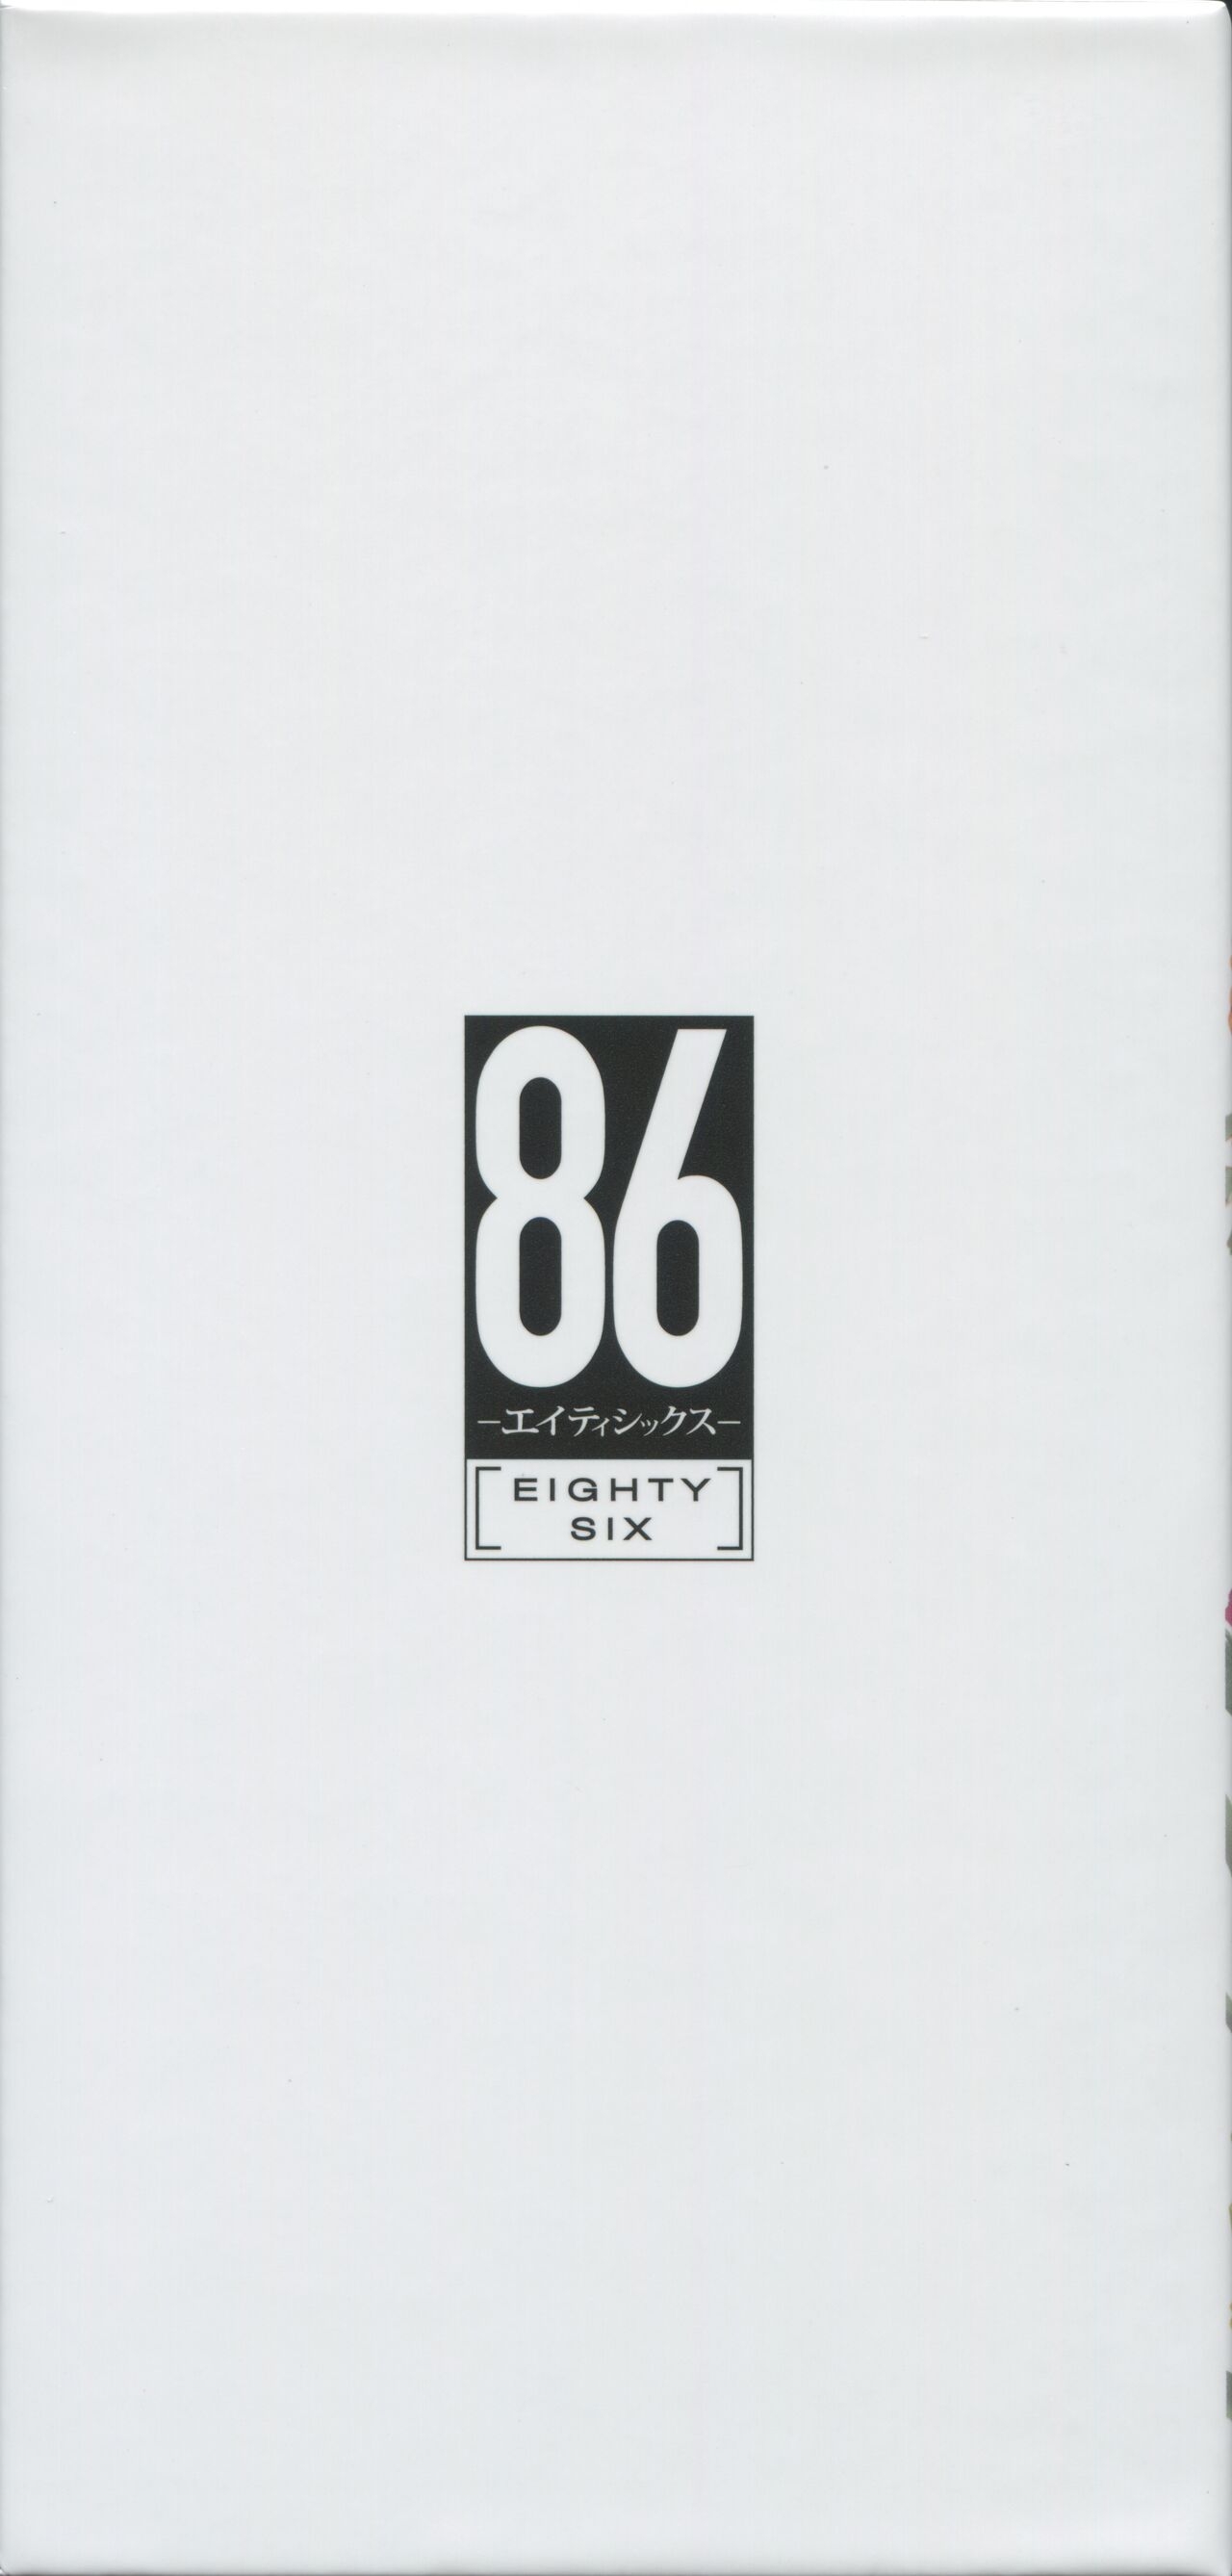 86 Eighty Six BD Scans + Booklet 302